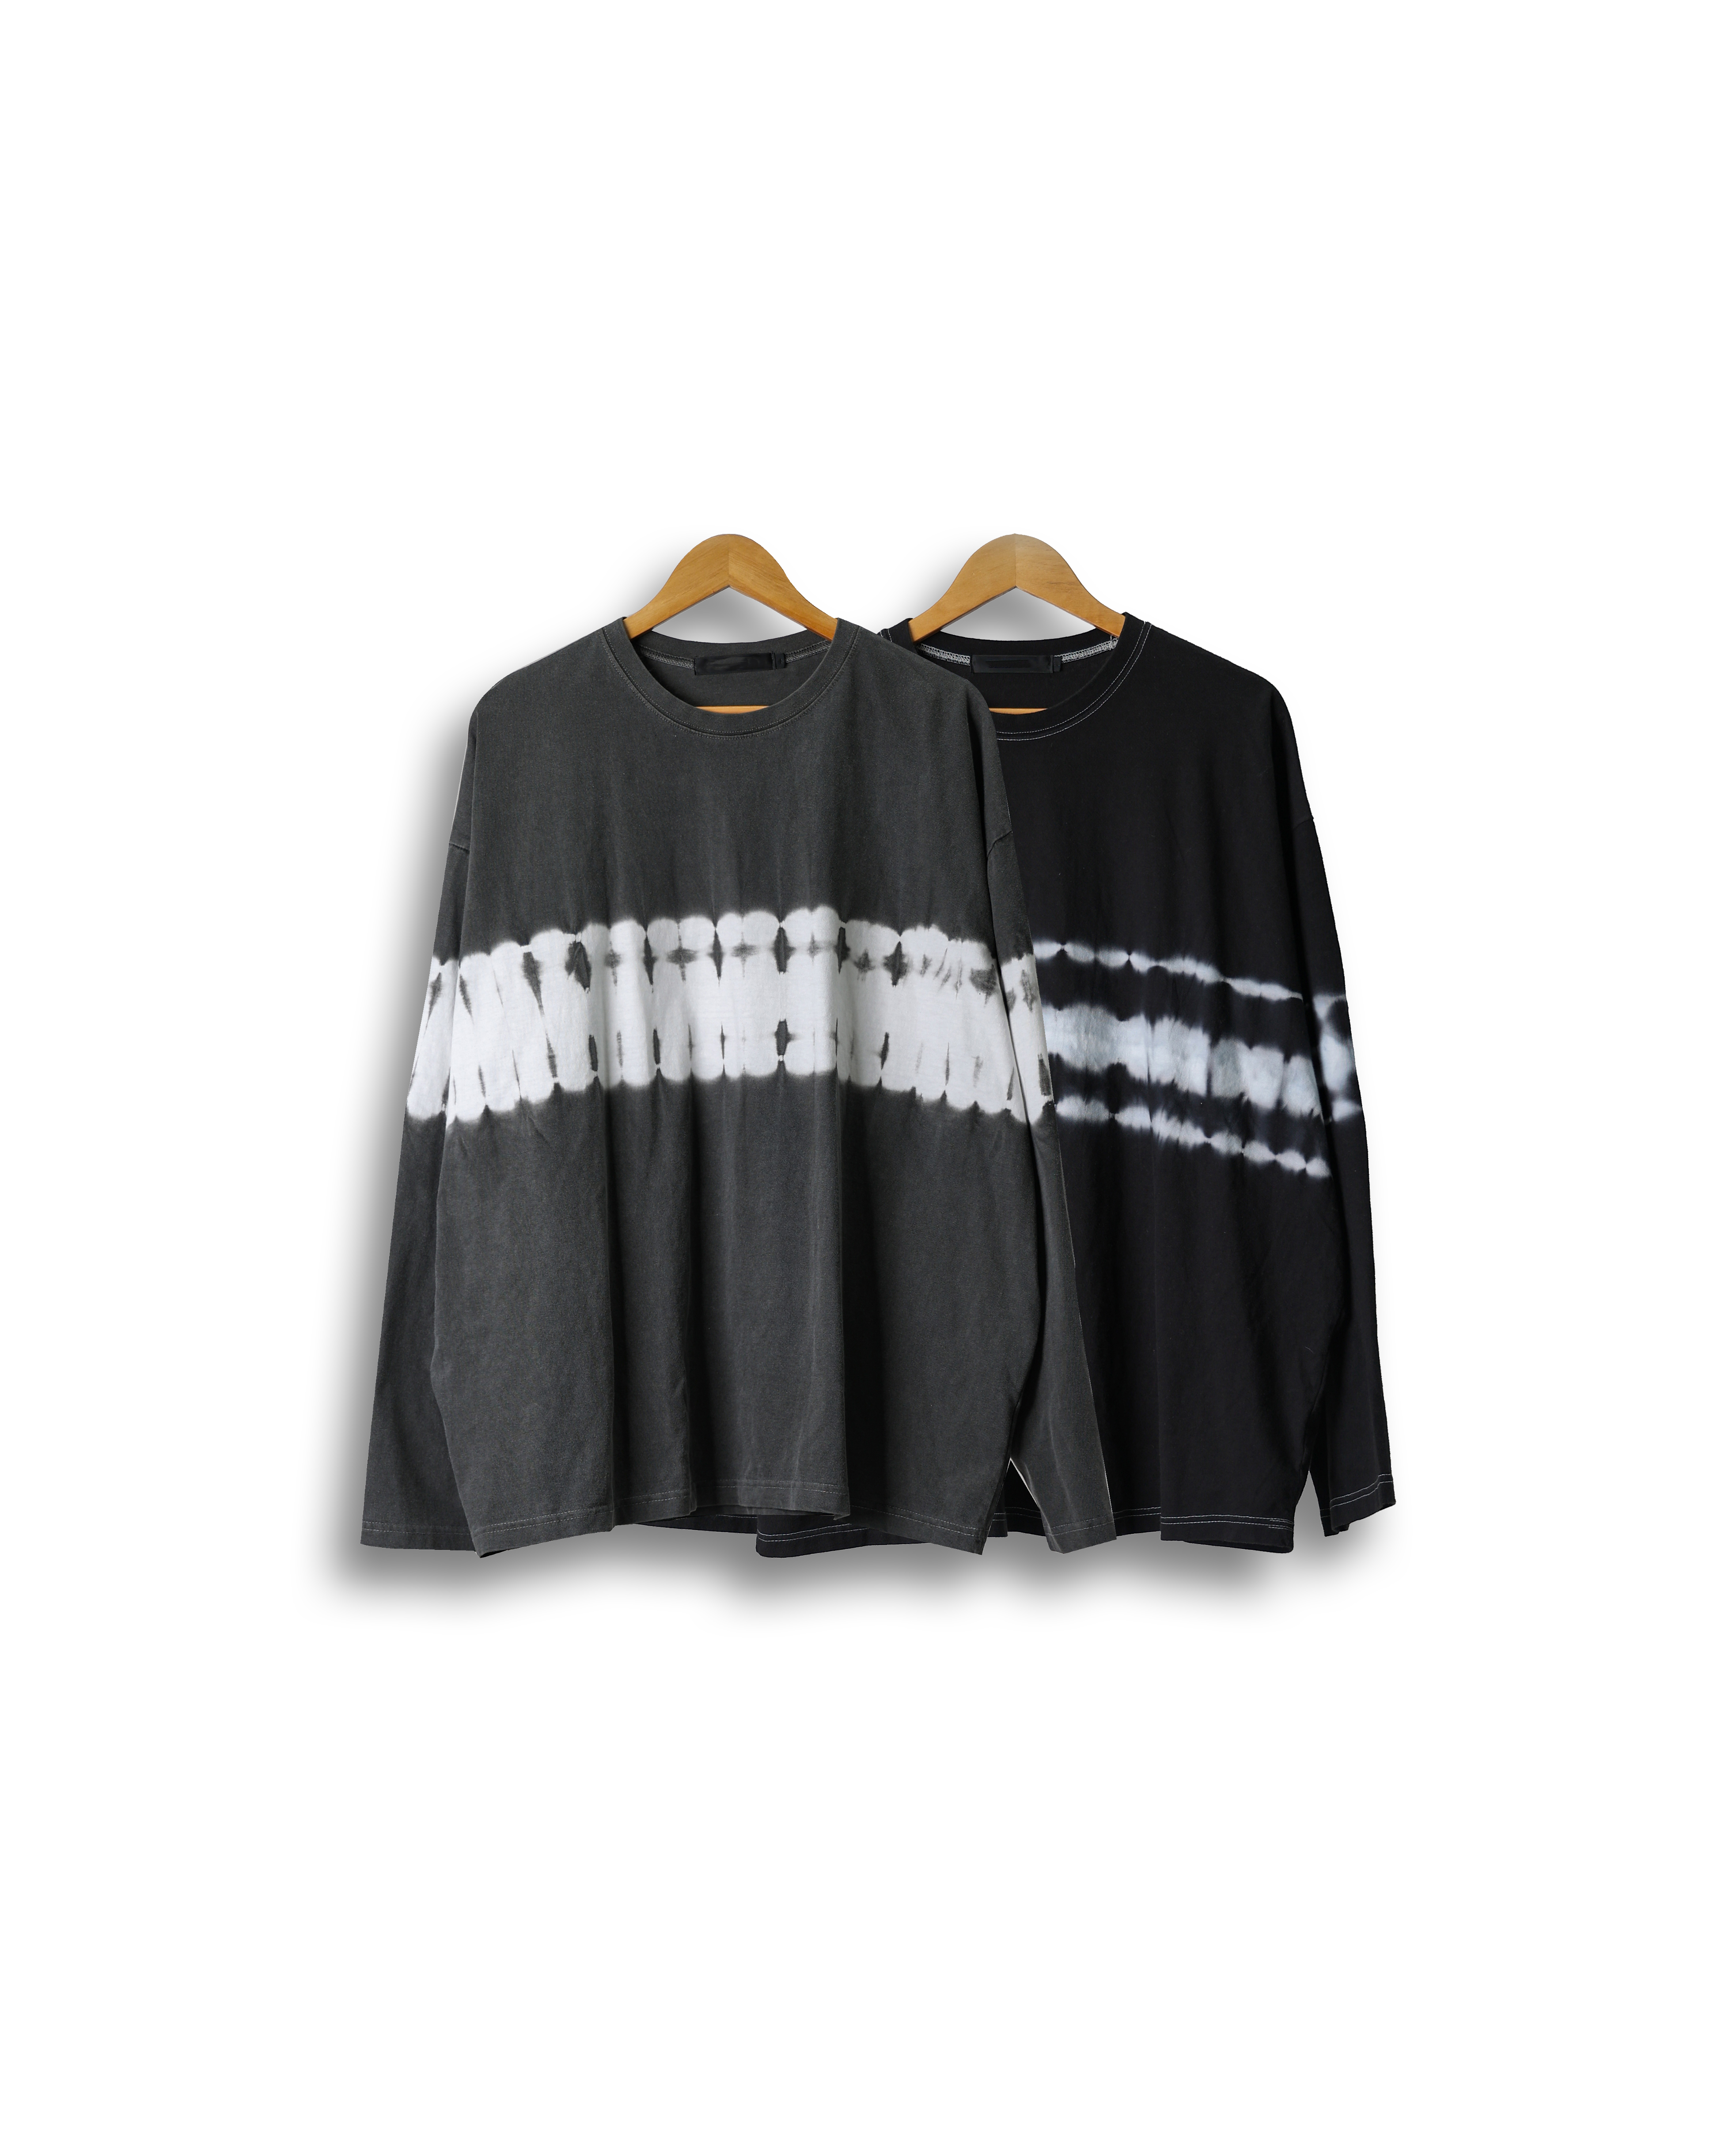 GLMM Middle Dying Over Long Sleeve (Black/Charcoal)